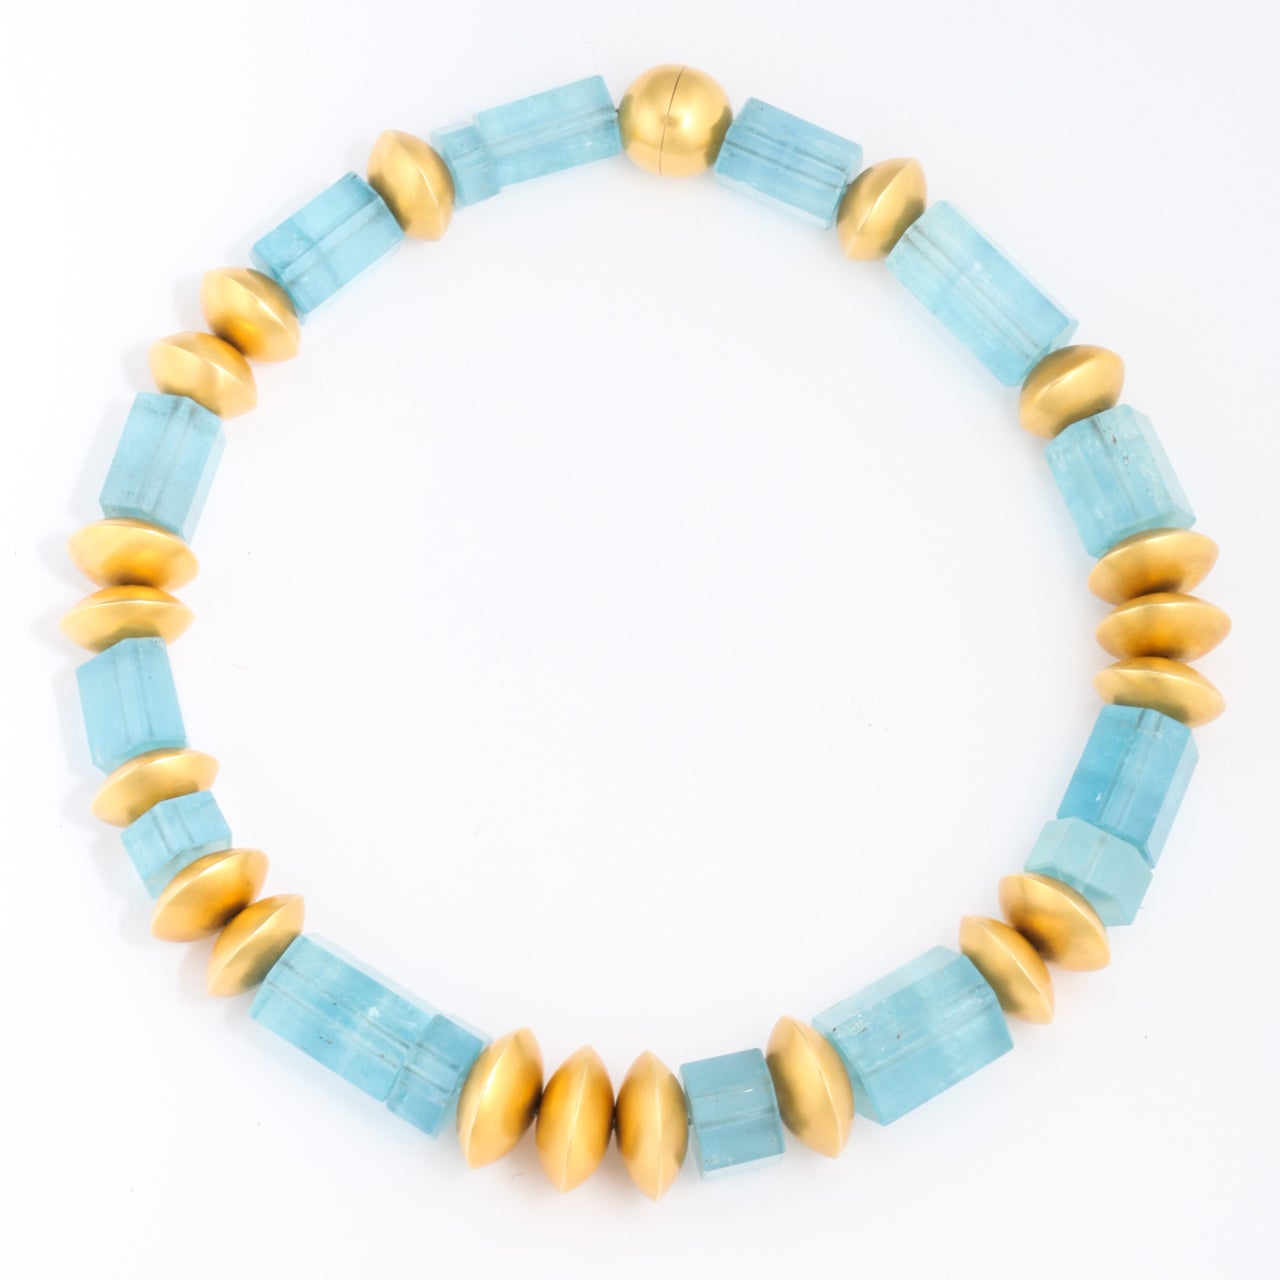 Hexagonal Aquamarine Beads separated by flattened round beads in 18kt Yellow Gold Beads.  Bold & giving the air of an Ancient Collar.  The closing is an 18kt Circular Bead with an invisible closing .